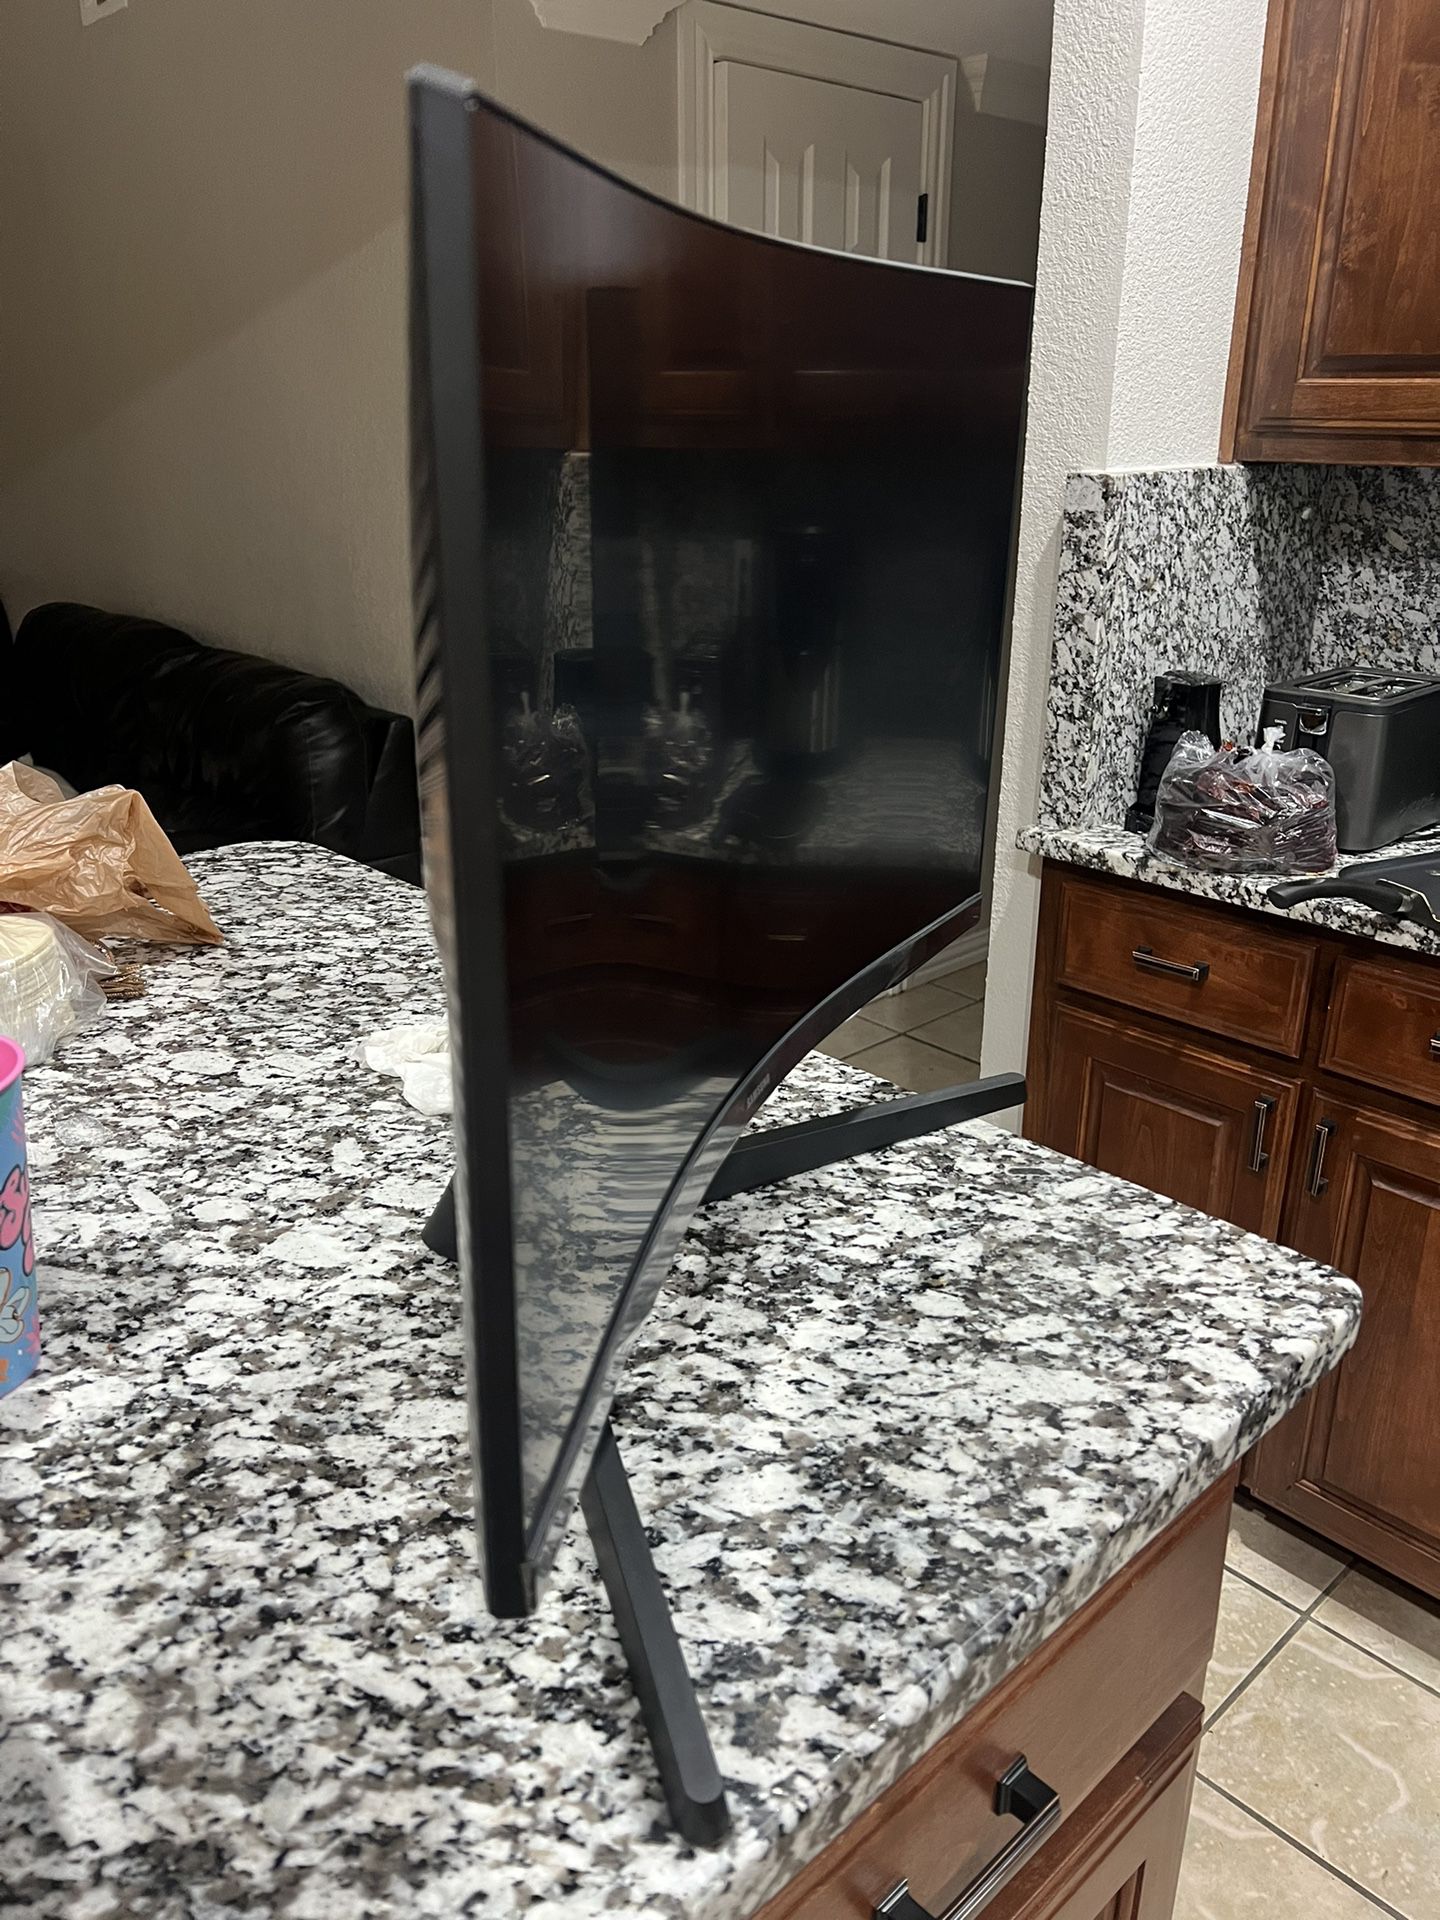 Samsung 27” Curved Odyssey Gaming Monitor